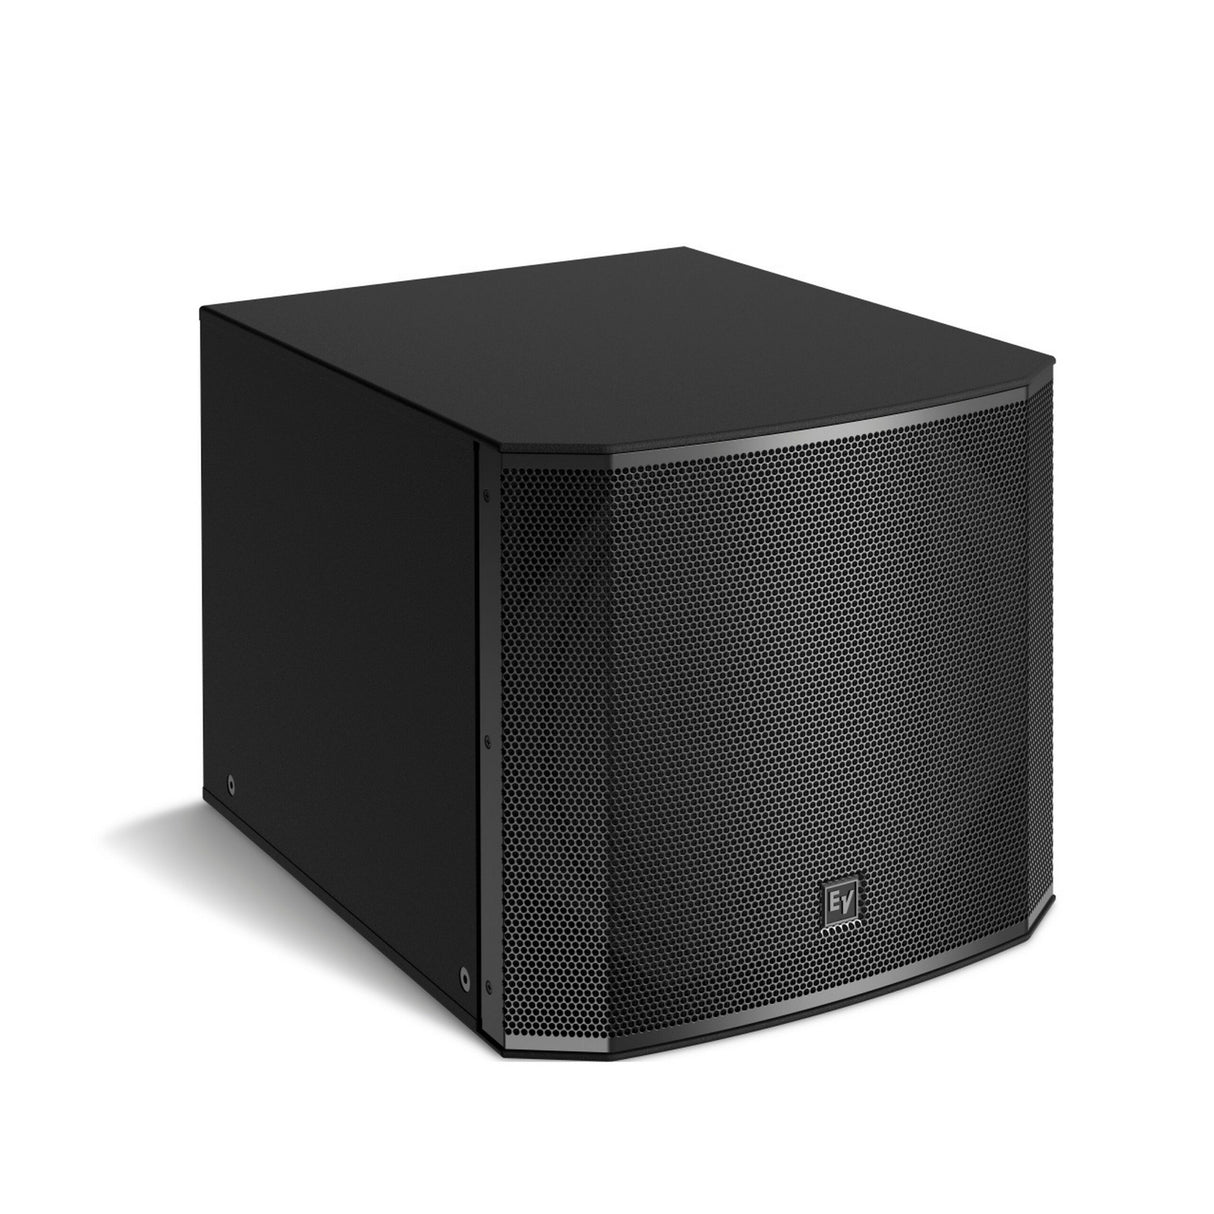 Electro-Voice EVC-1181S-B 18-Inch Indoor Subwoofer without Rigging Hardware, Black